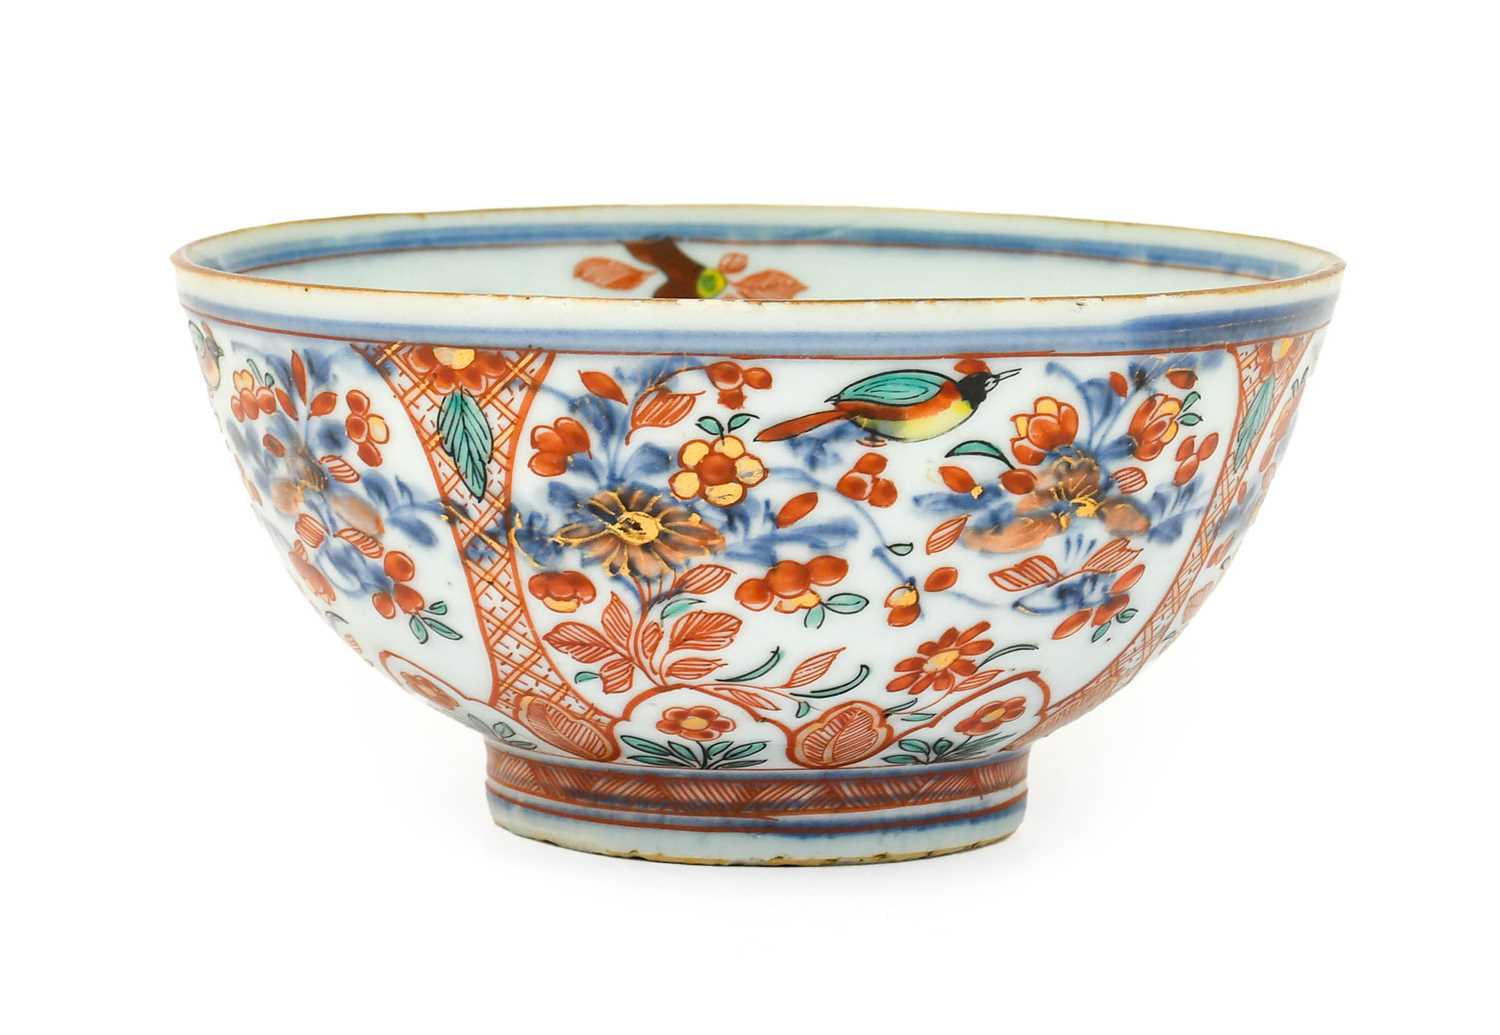 A Dutch-Decorated Chinese Porcelain Bowl, 1st half 18th century, the interior painted with a - Image 3 of 7